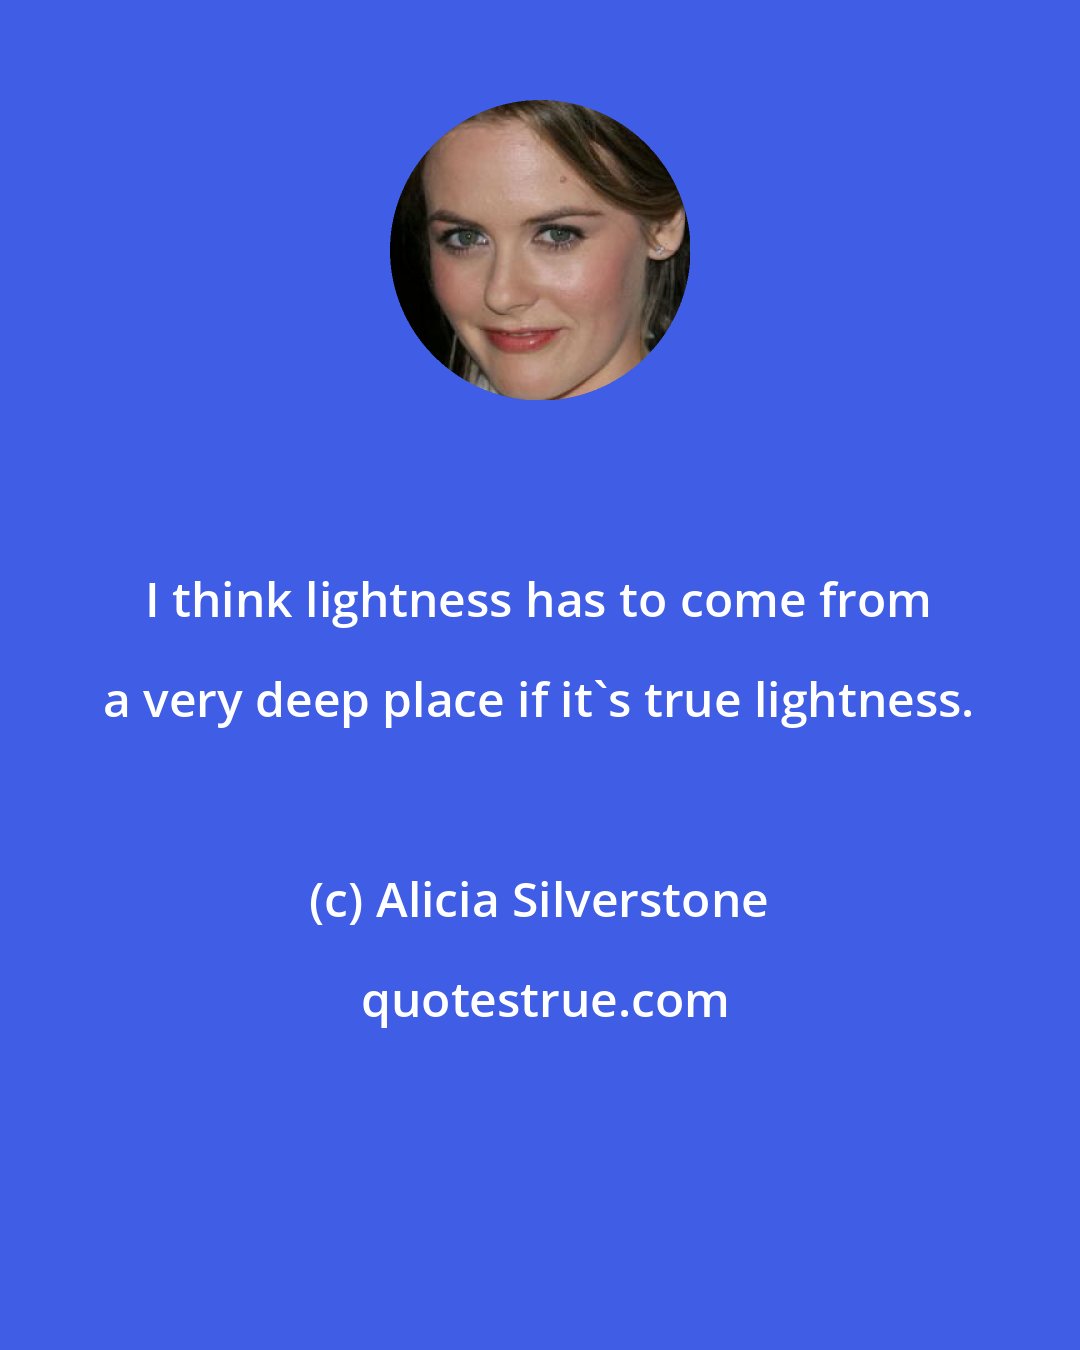 Alicia Silverstone: I think lightness has to come from a very deep place if it's true lightness.